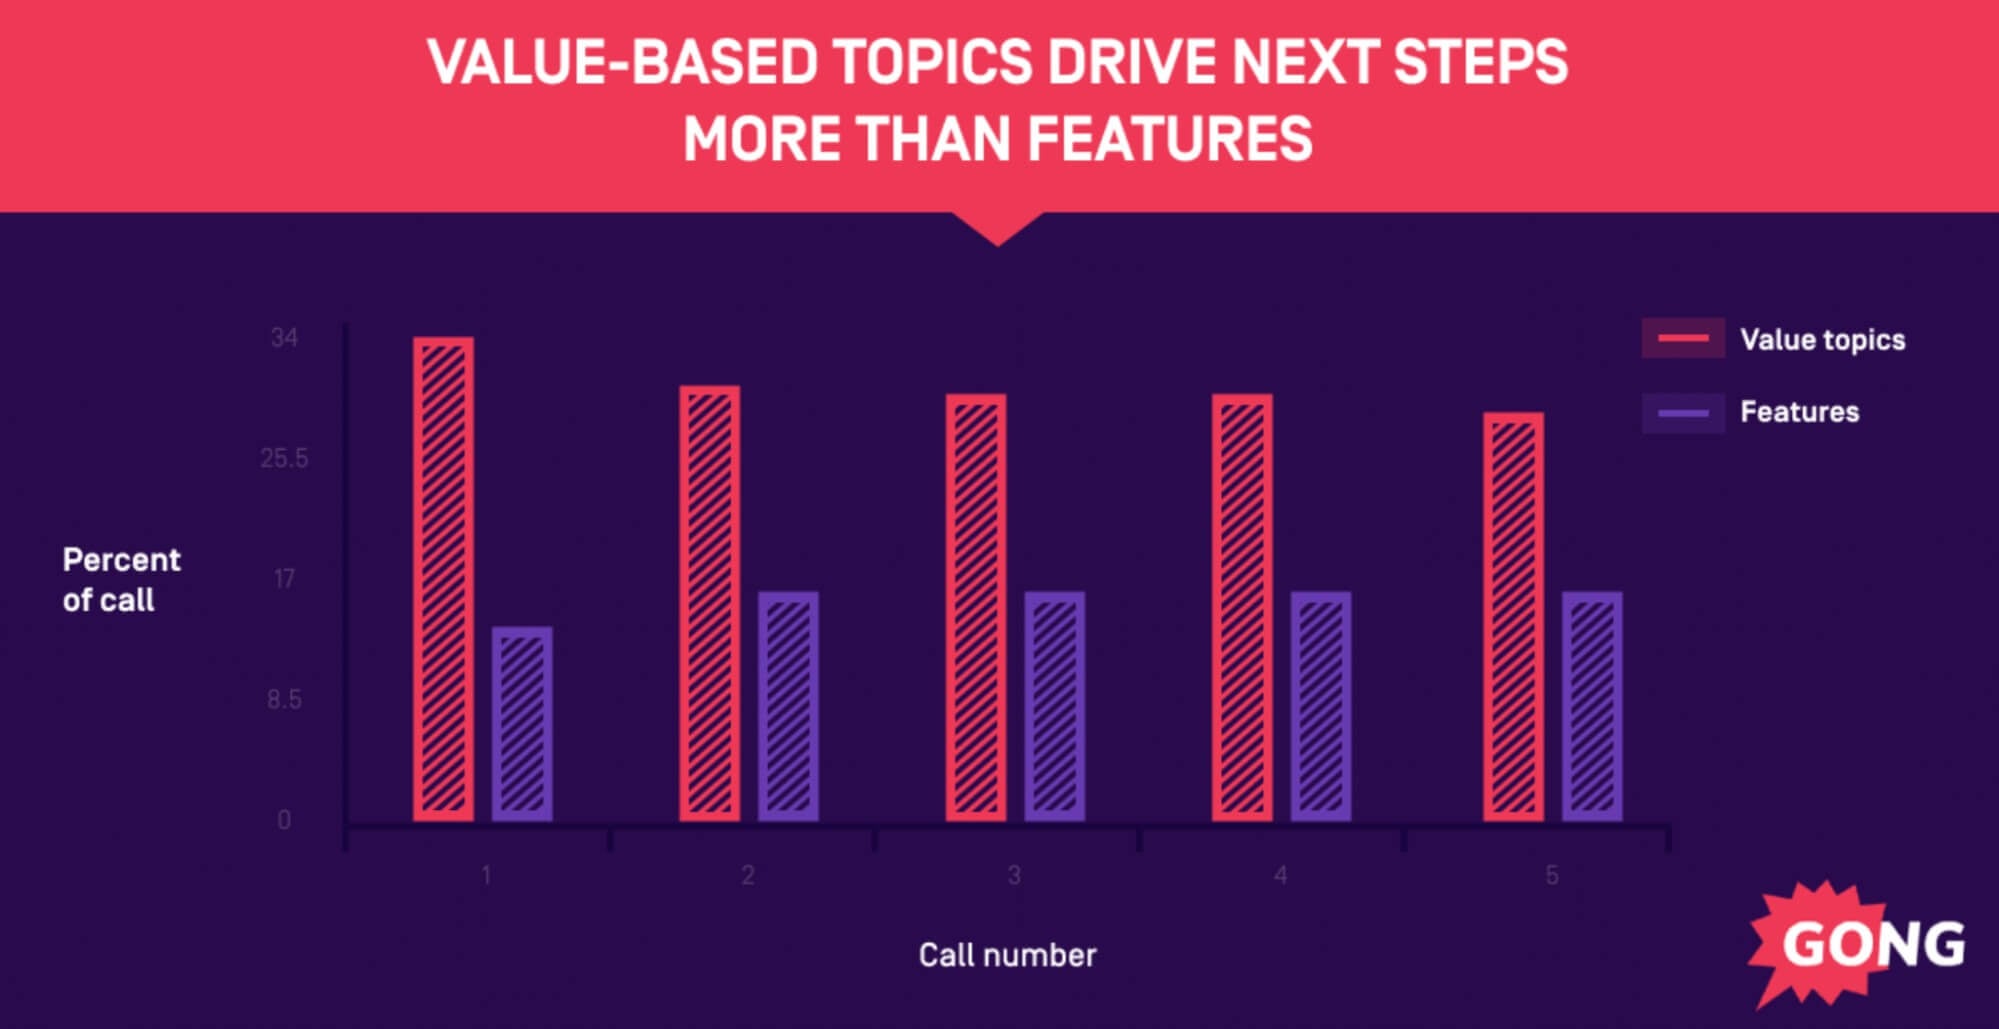 How value-based topics drive next steps